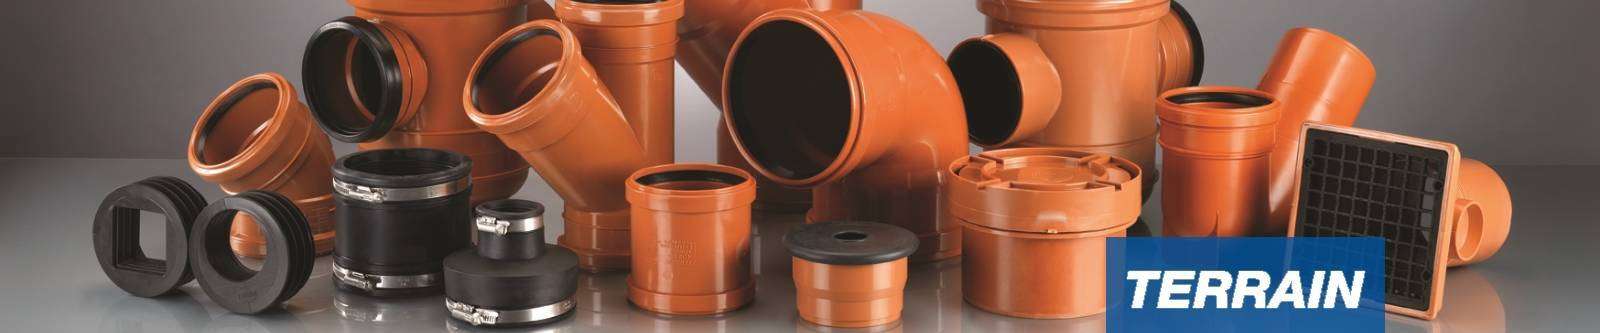 Terrain Underground drainage systems for commercial and public buildings